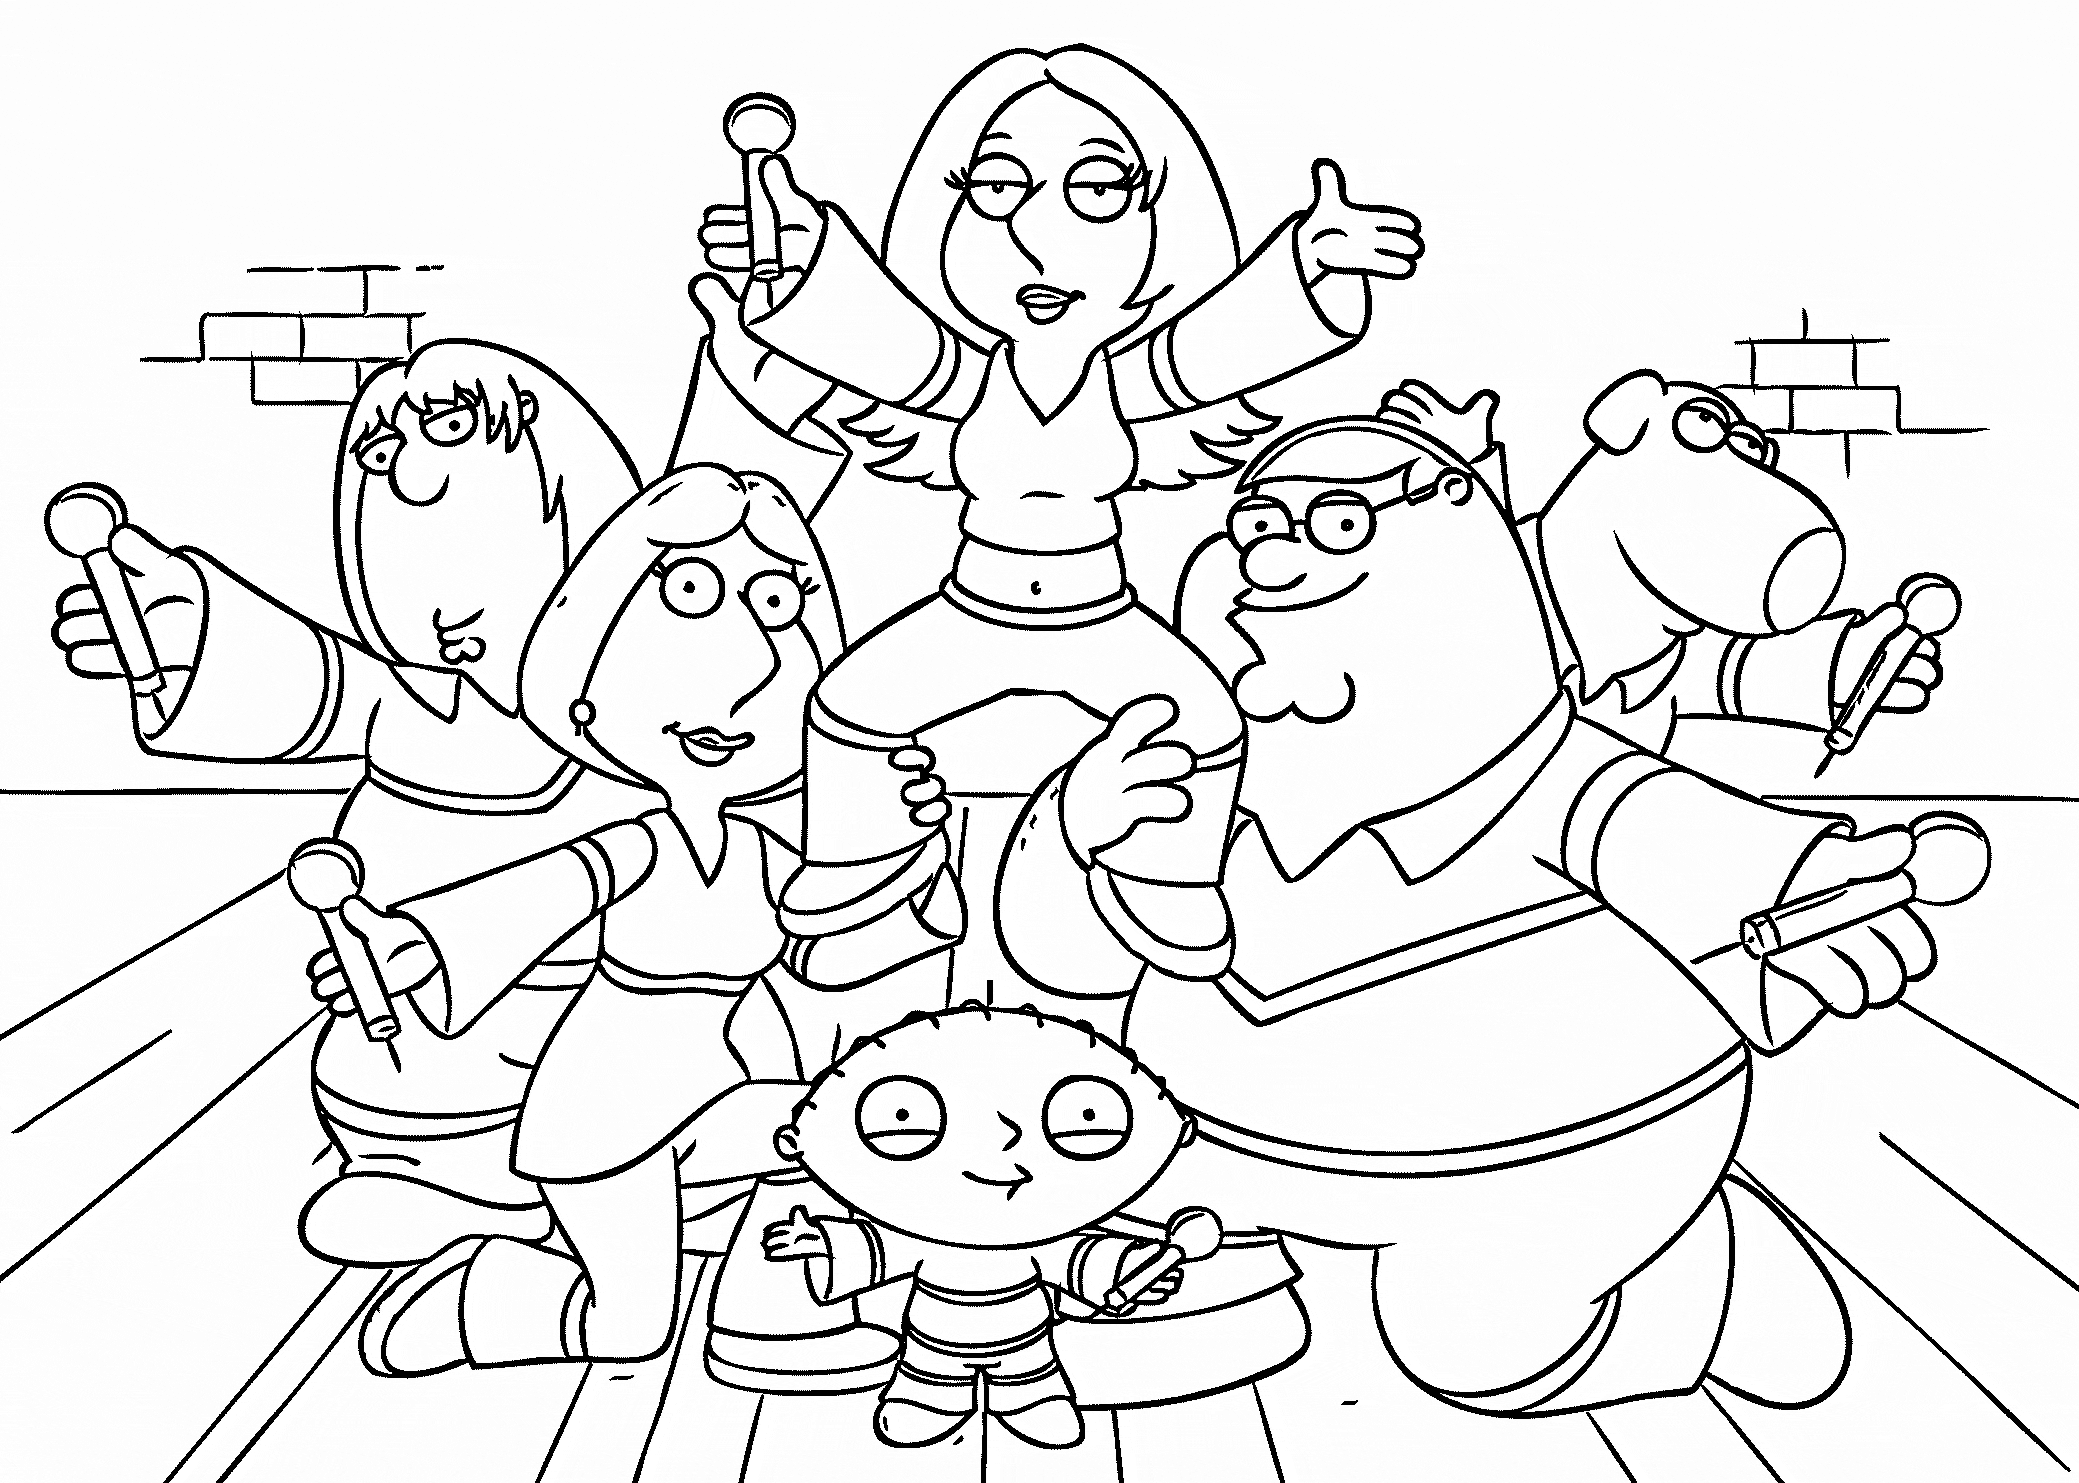 Family Guy Coloring Page - Coloring Pages for Kids and for Adults